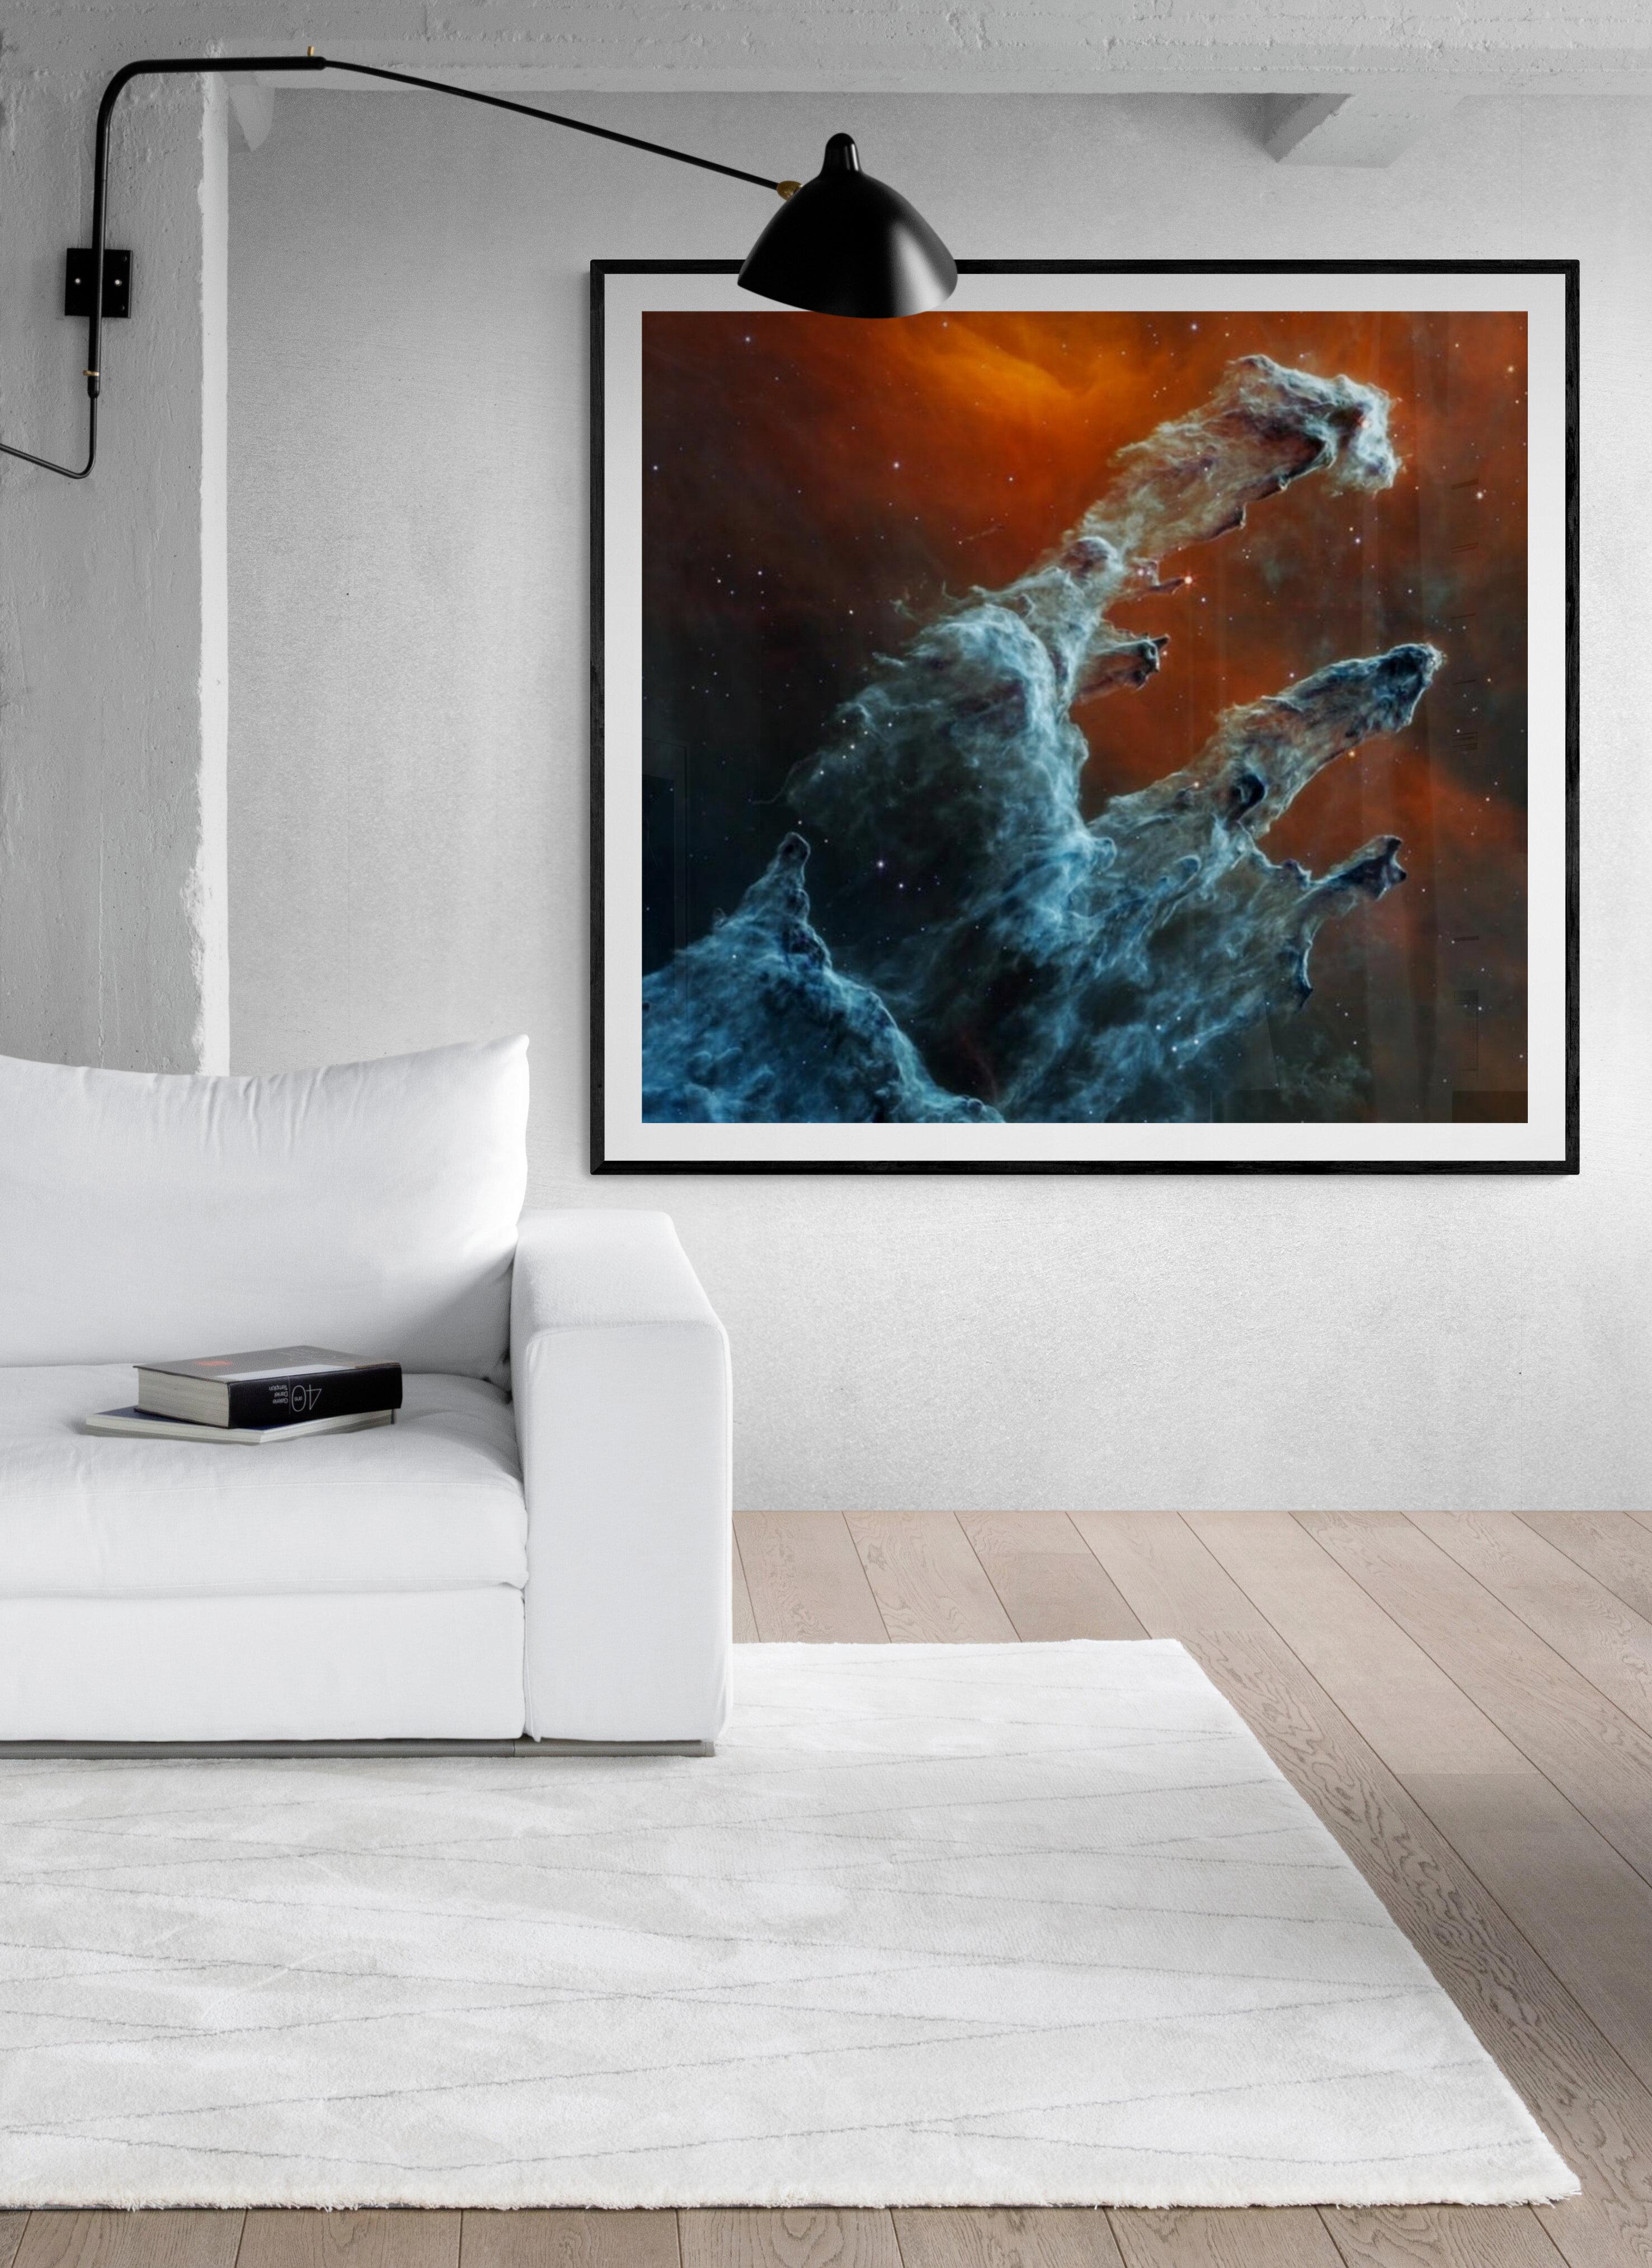 The WEBB imagery is of the most important imagery every taken. 
The finest museum quality WEBB images available. 
Printed on archival paper using archival inks.
50x40
Framing options available

NASA’s James Webb Space Telescope’s mid-infrared view